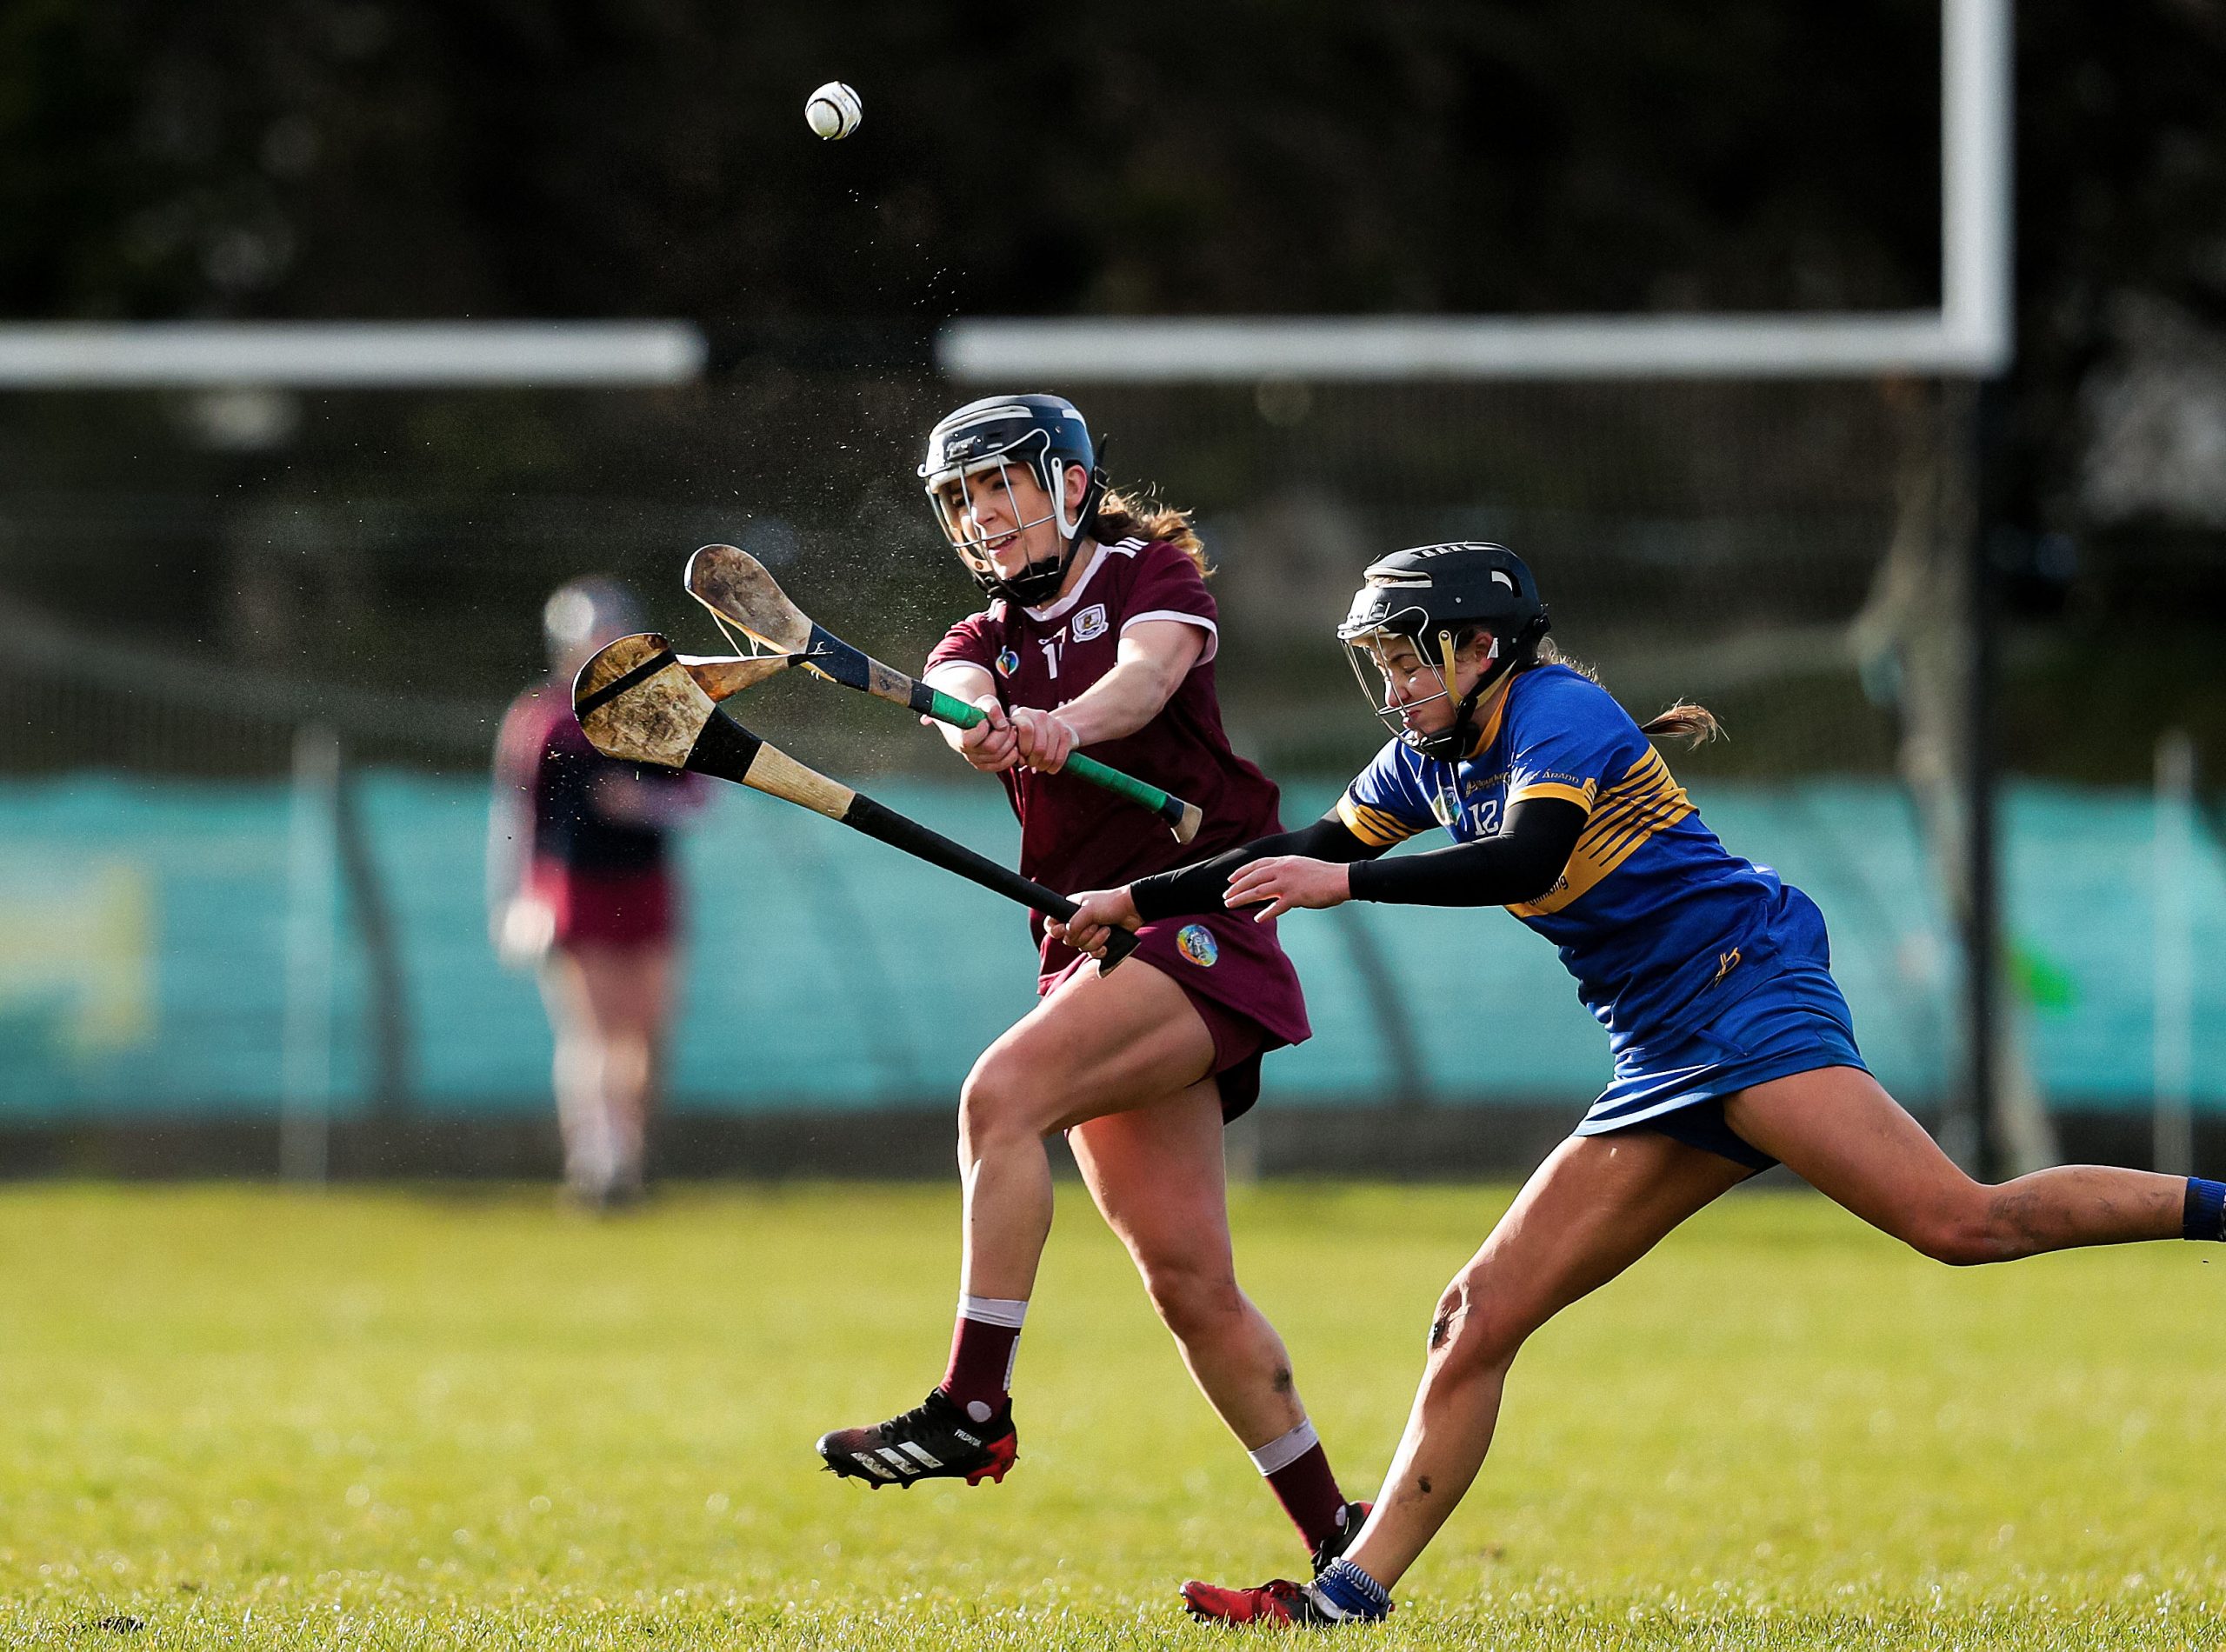 PREVIEW: Galway v Tipperary, Liberty Insurance All-Ireland Senior Championship Semi-Final